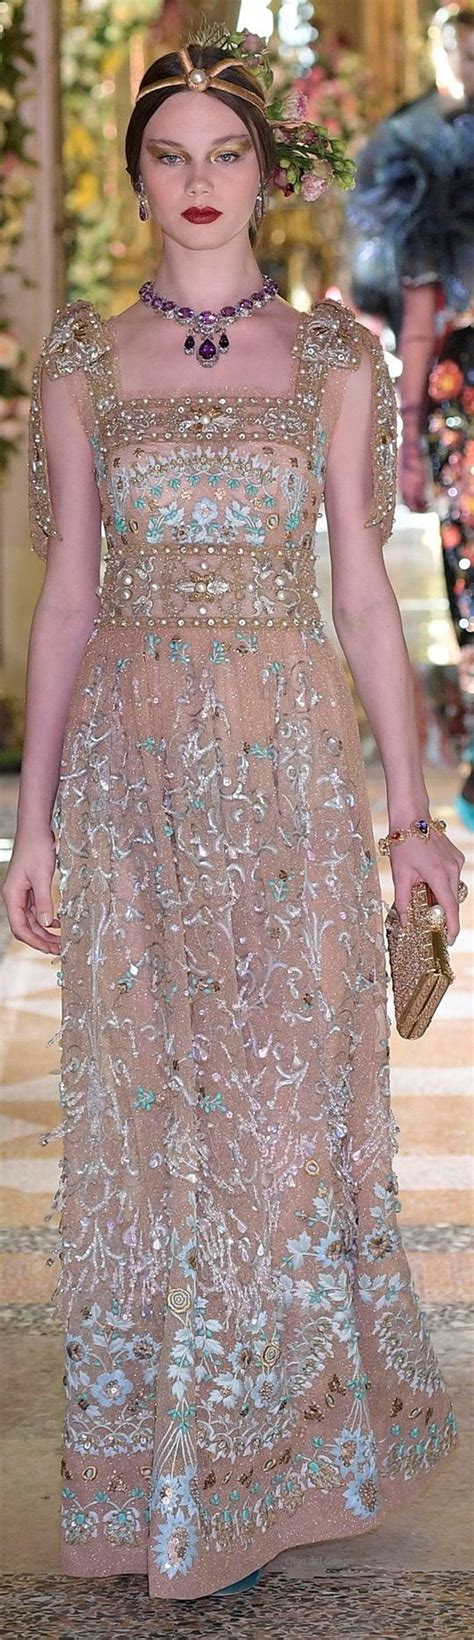 Pin By Nadia 👑 Karam On Fashionista⭐️haute Couture Designer Party Wear Dresses Evening Gown